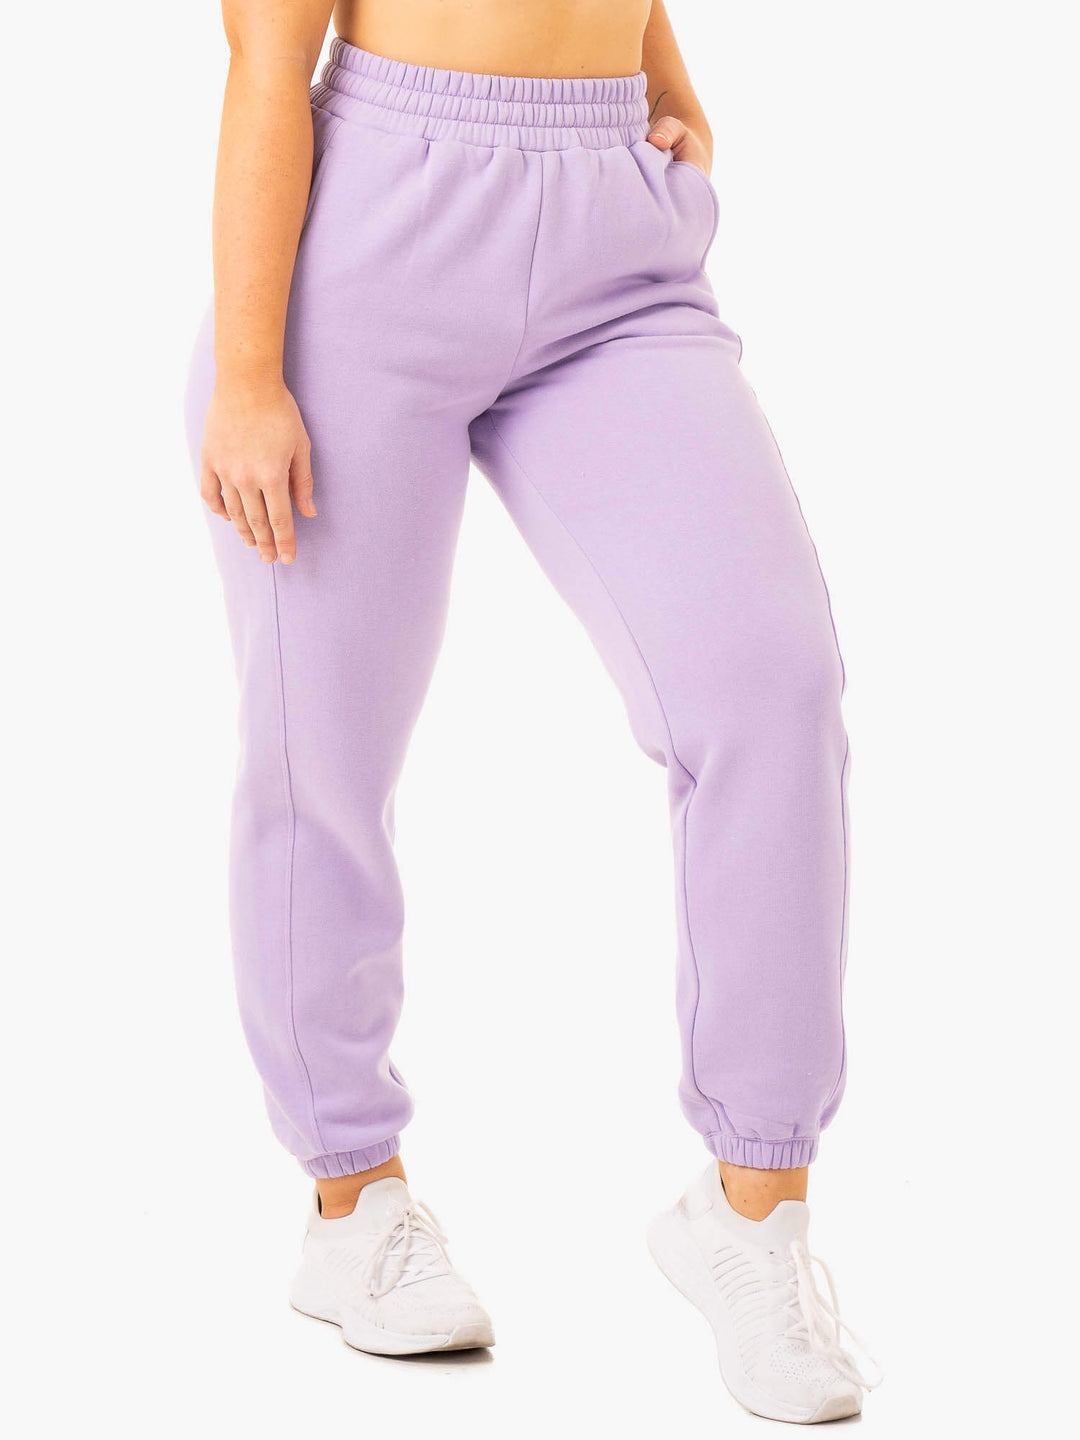 Sideline Track Pants - Lilac Clothing Ryderwear 